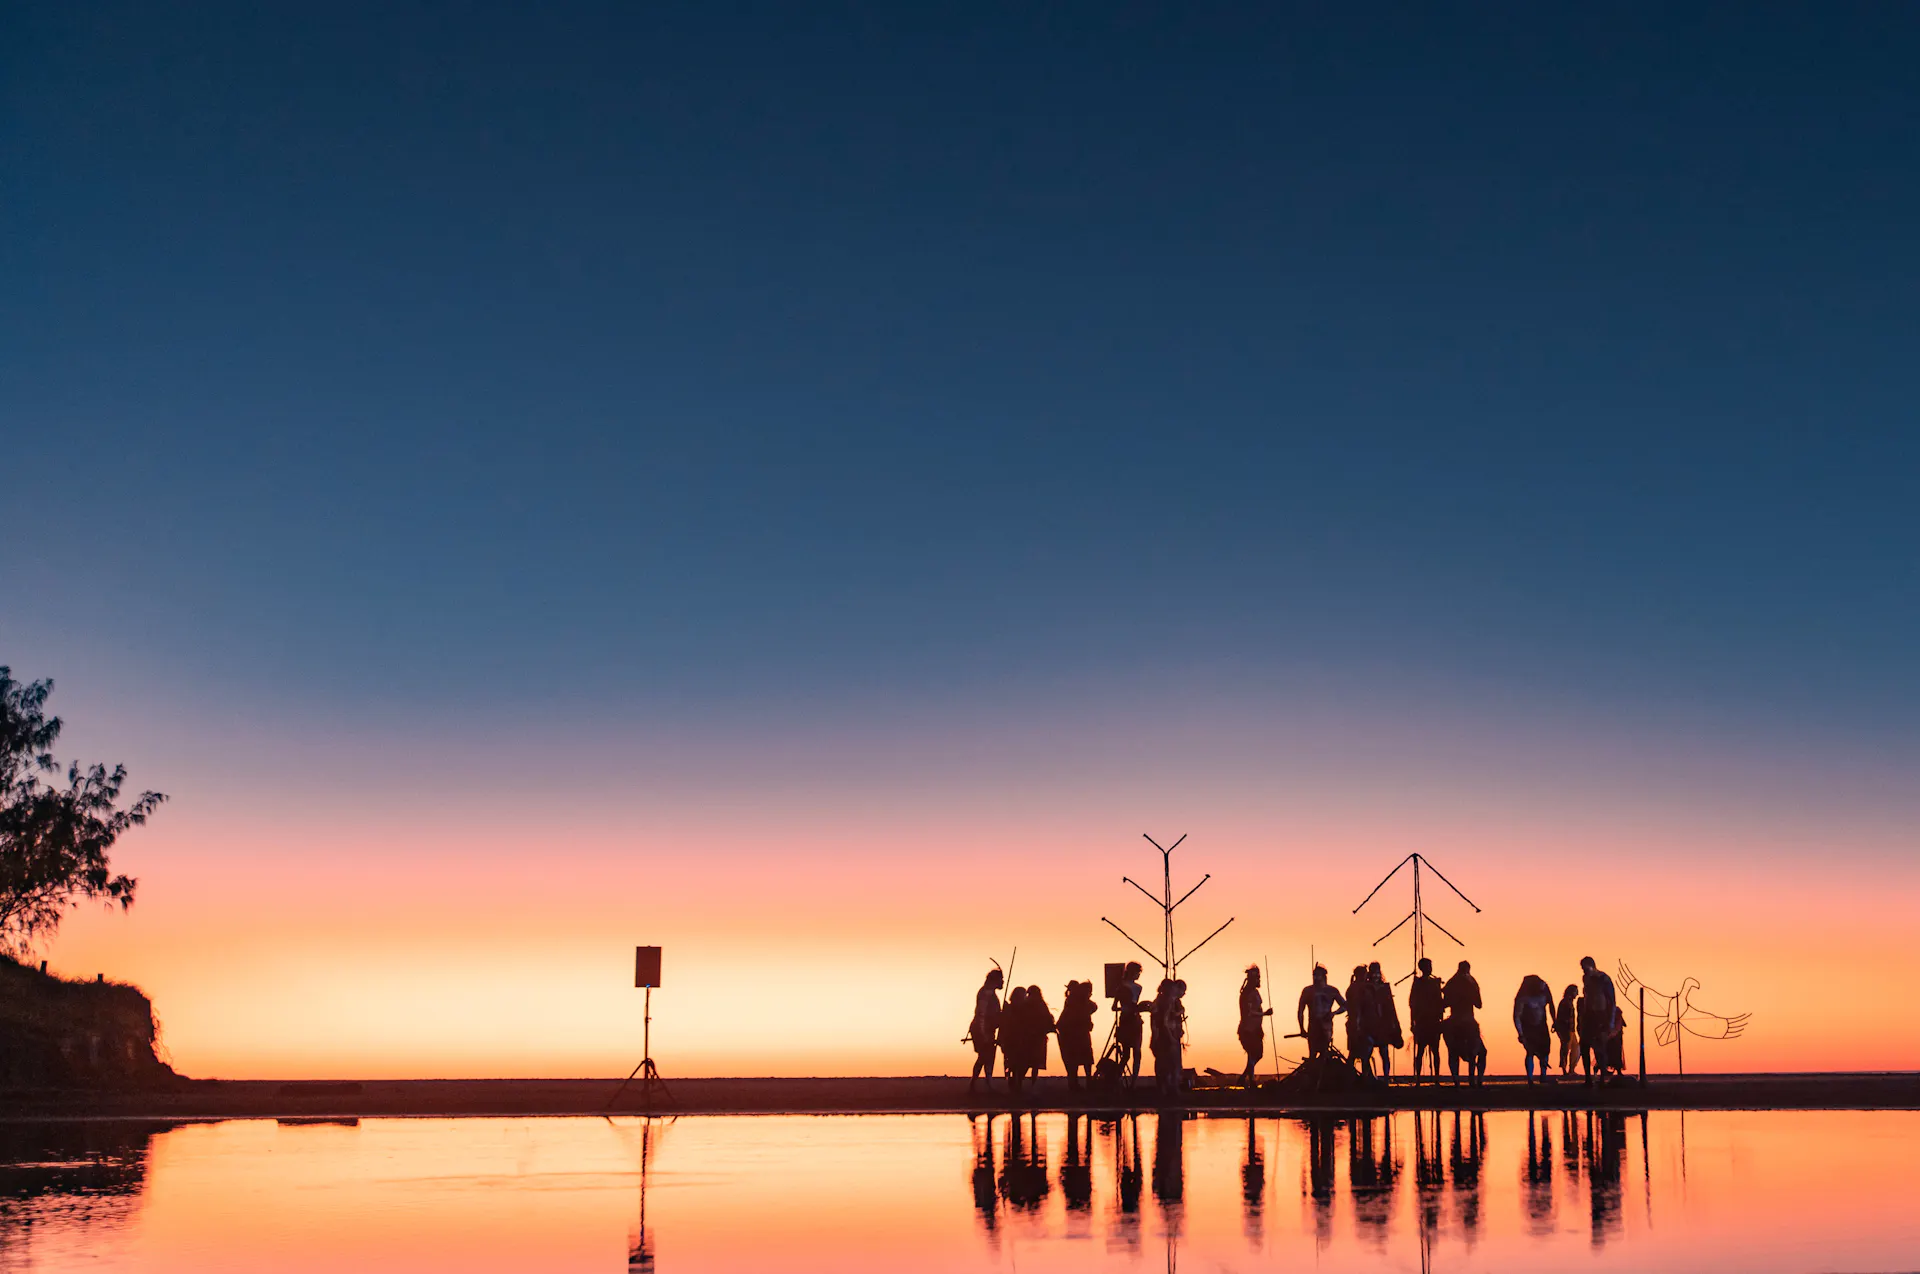 Performers gathered on a beach at dawn